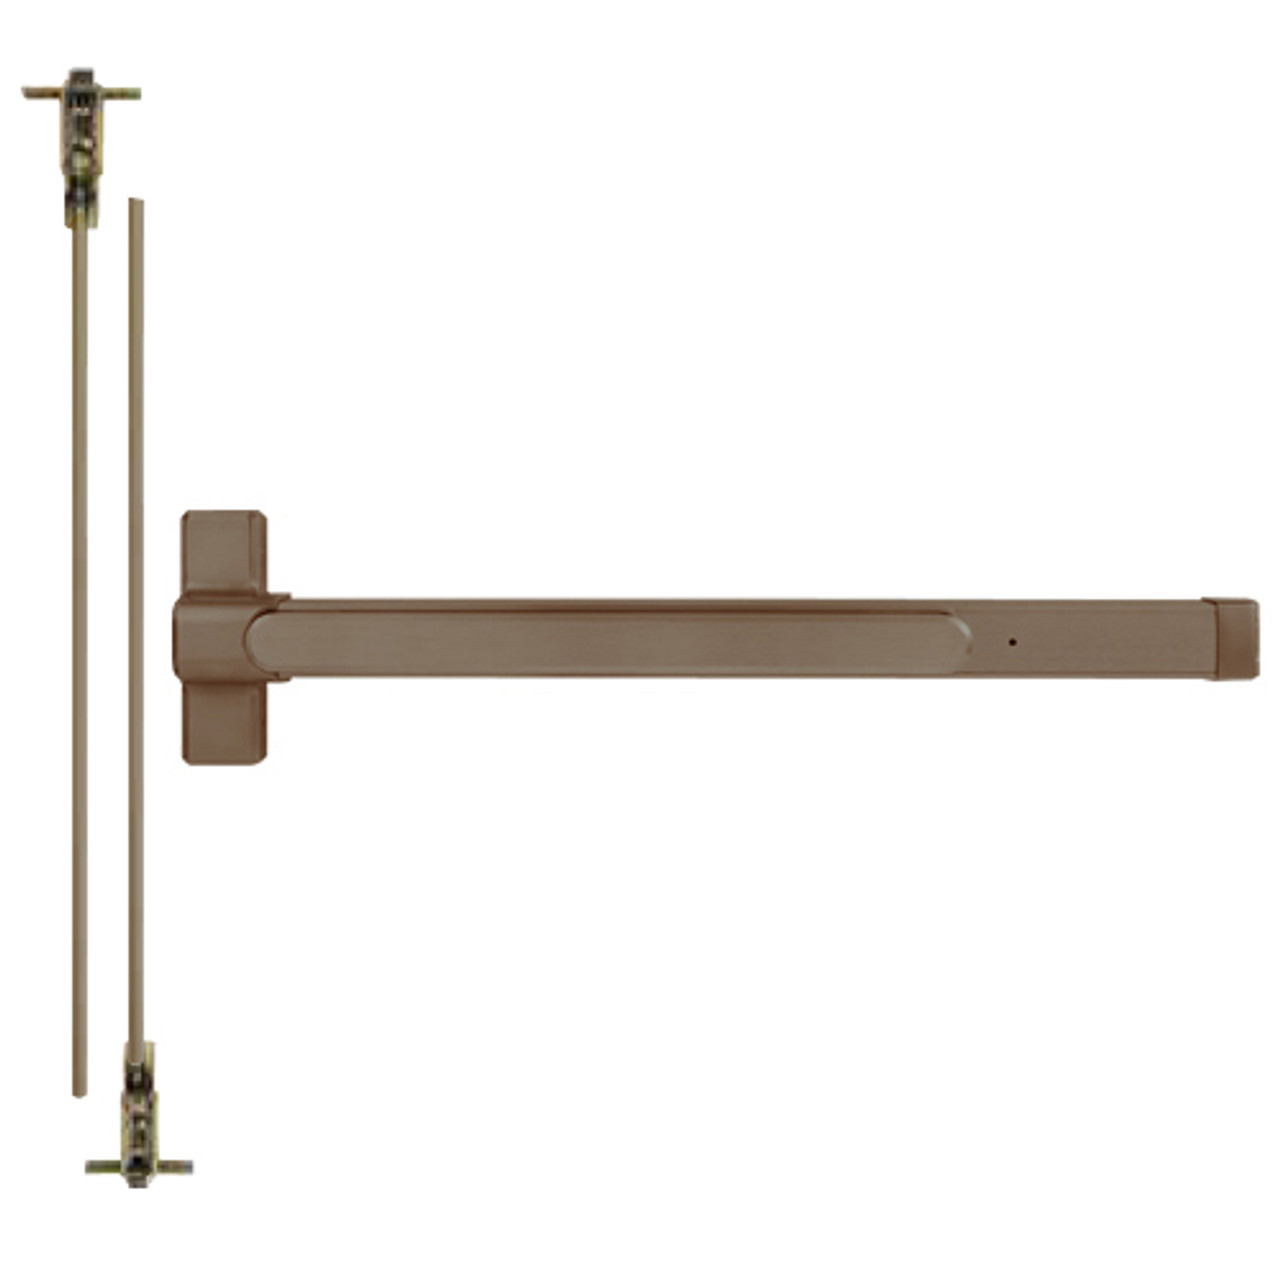 QED125X-36-8-313AN-LC Stanley QED100 Series Heavy Duty Concealed Vertical Rod Cylinder Dog Exit Device in Anodized Duranodic Bronze Finish